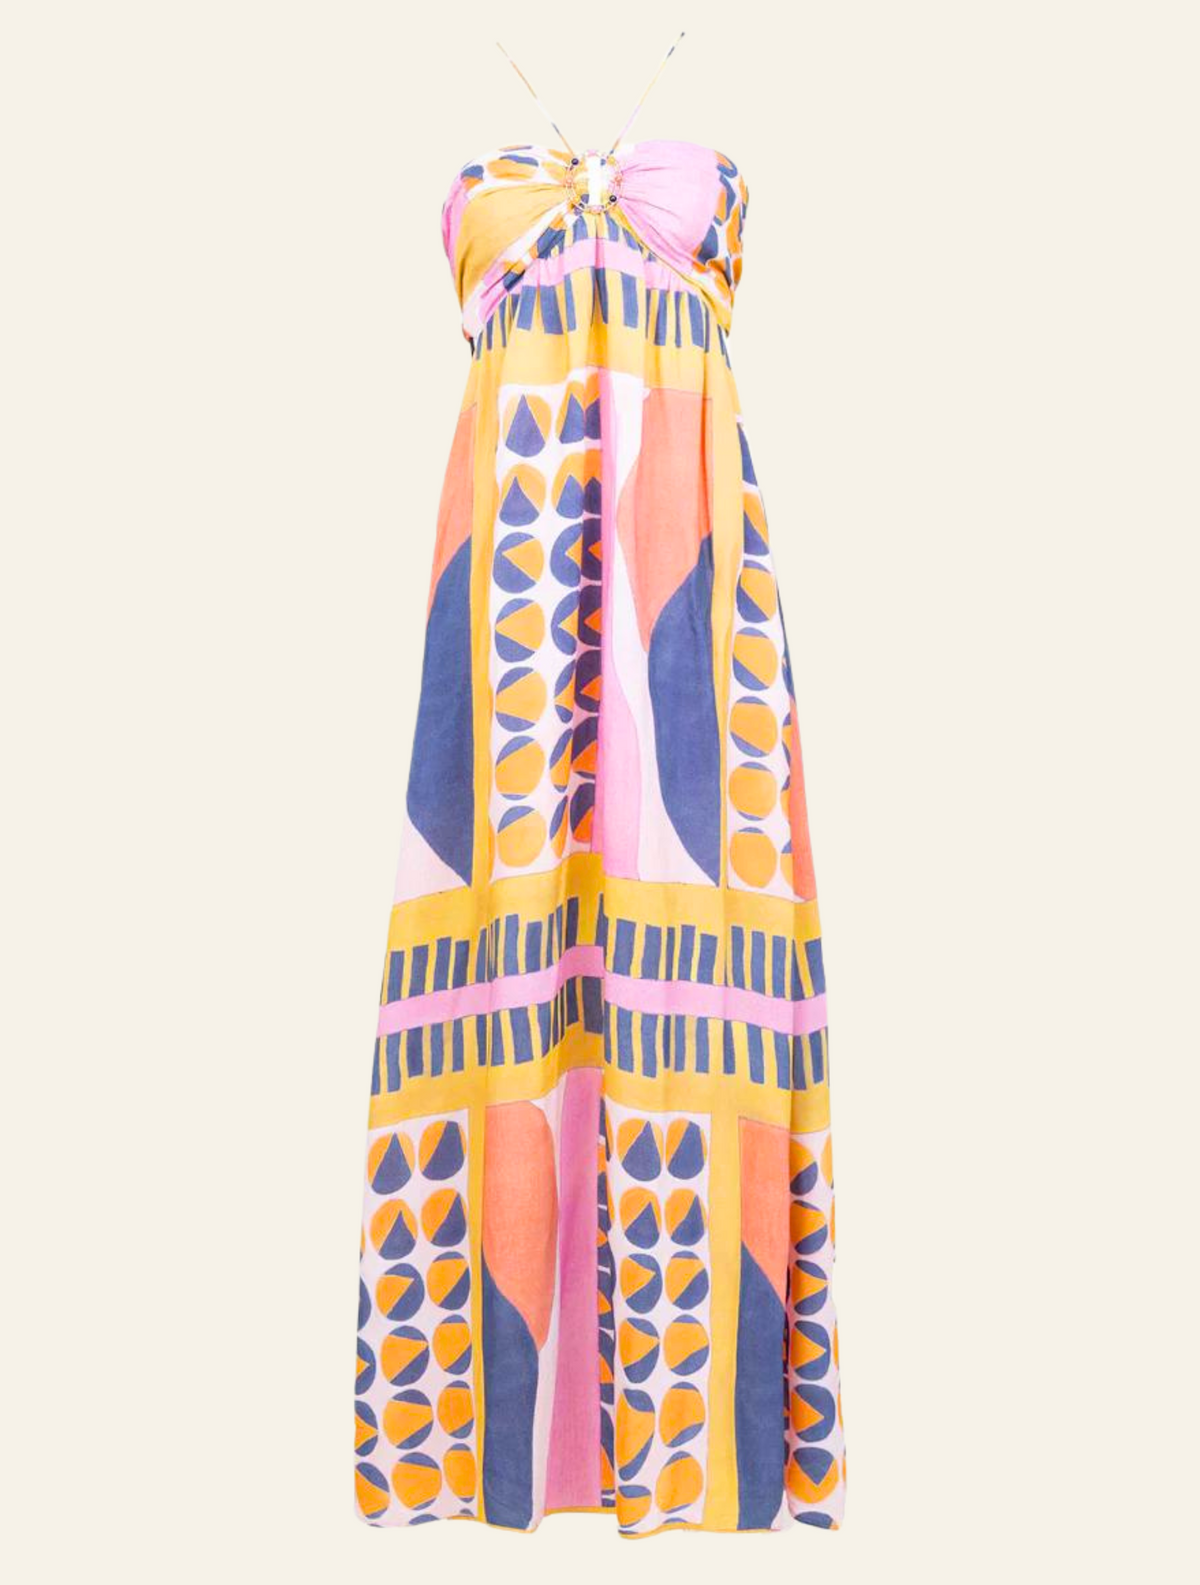 maxi length dress in geometric print with adjustable straps and open back detail